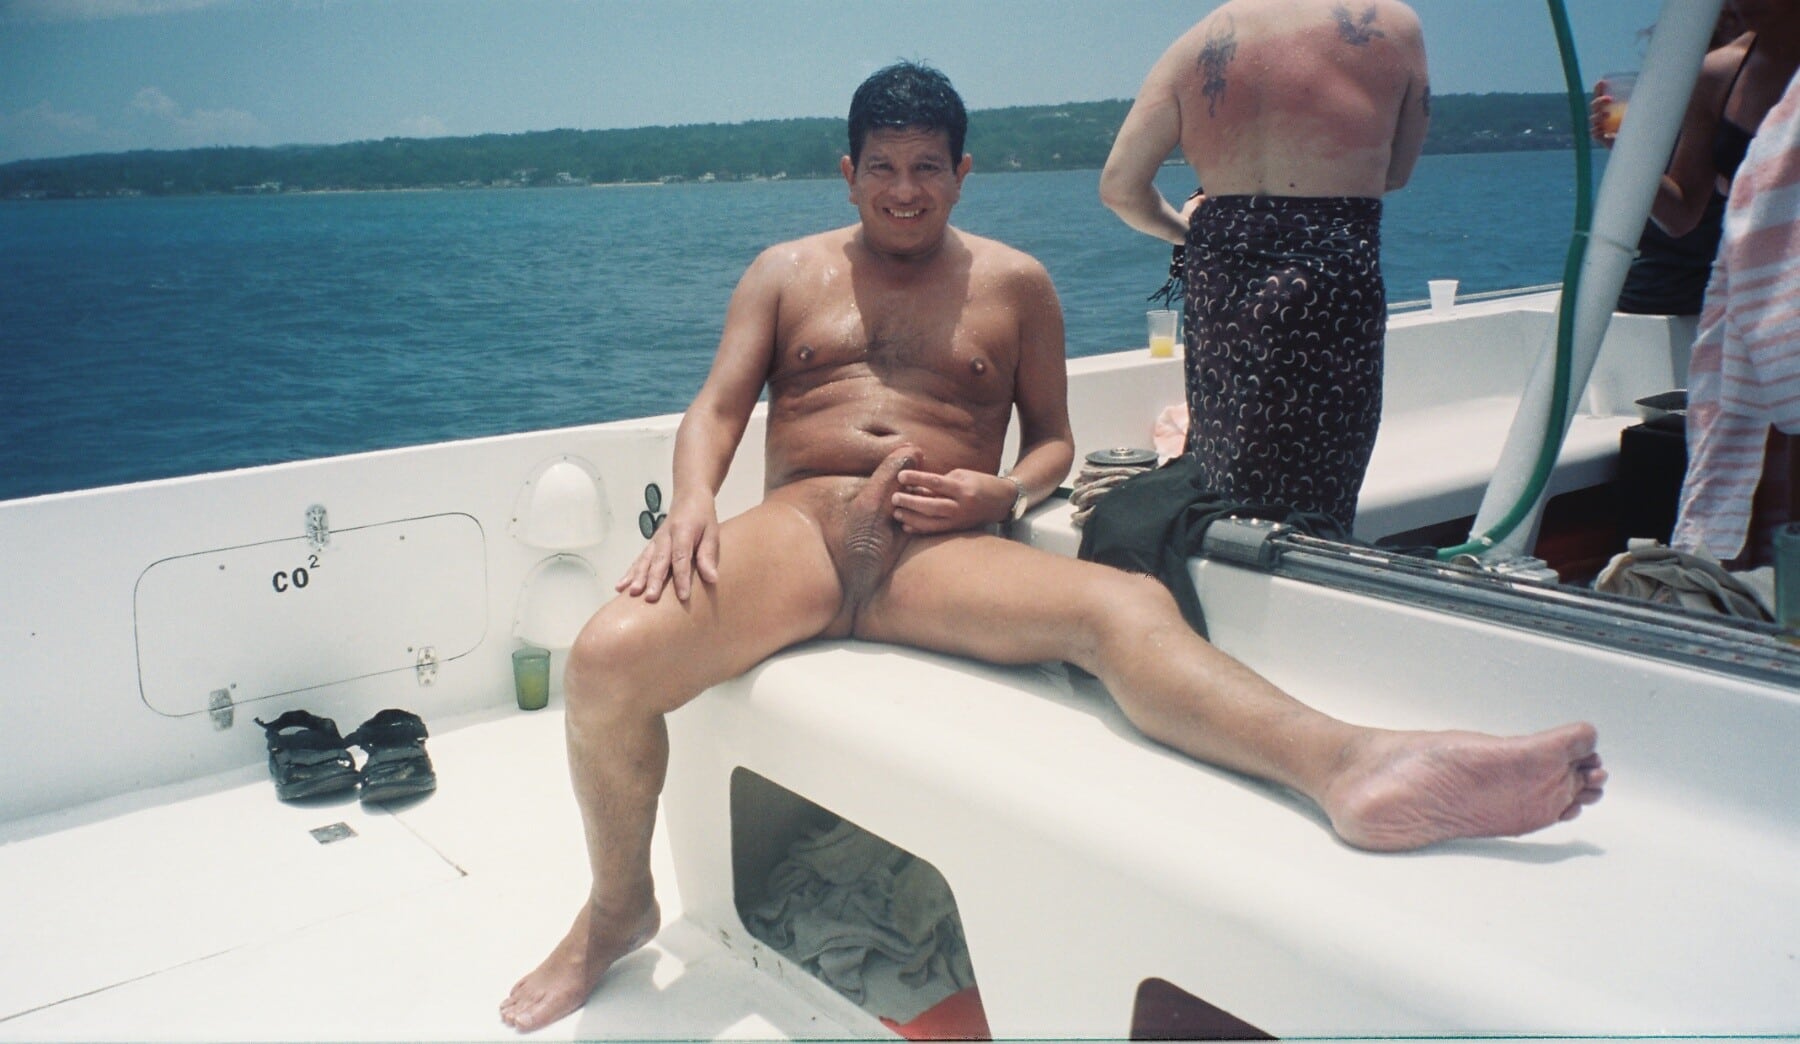 Fun on party boat Dick Flash Pics, Real Amateurs from Google, Tumblr, Pinterest, Facebook, Twitter, Instagram and Snapchat. pic